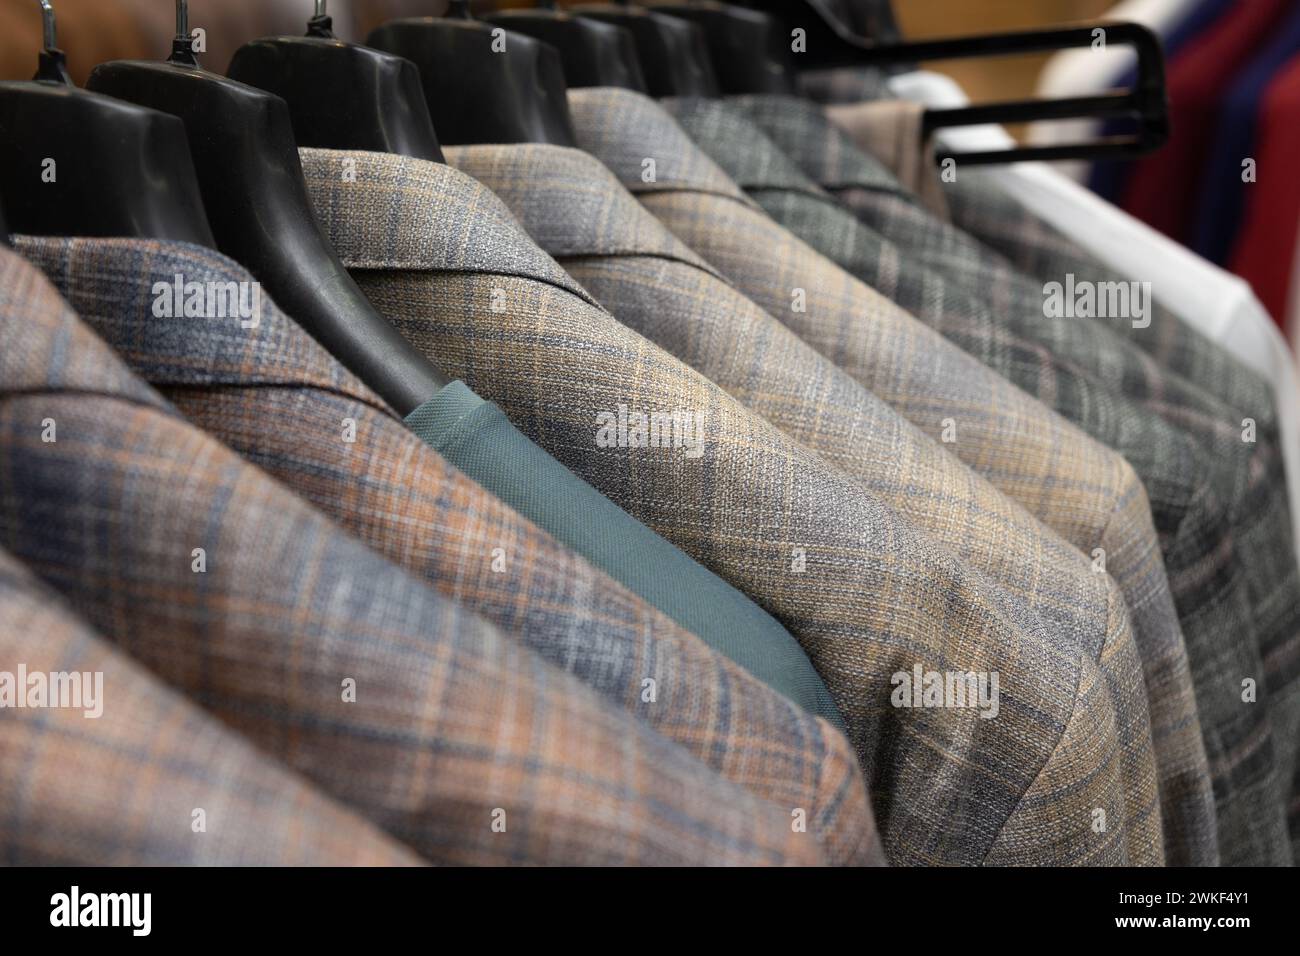 A row of men's suits, jackets hanging on a rack for display. Elegant man suit jackets hanging in a row with close up of sleeve and buttons. Stock Photo